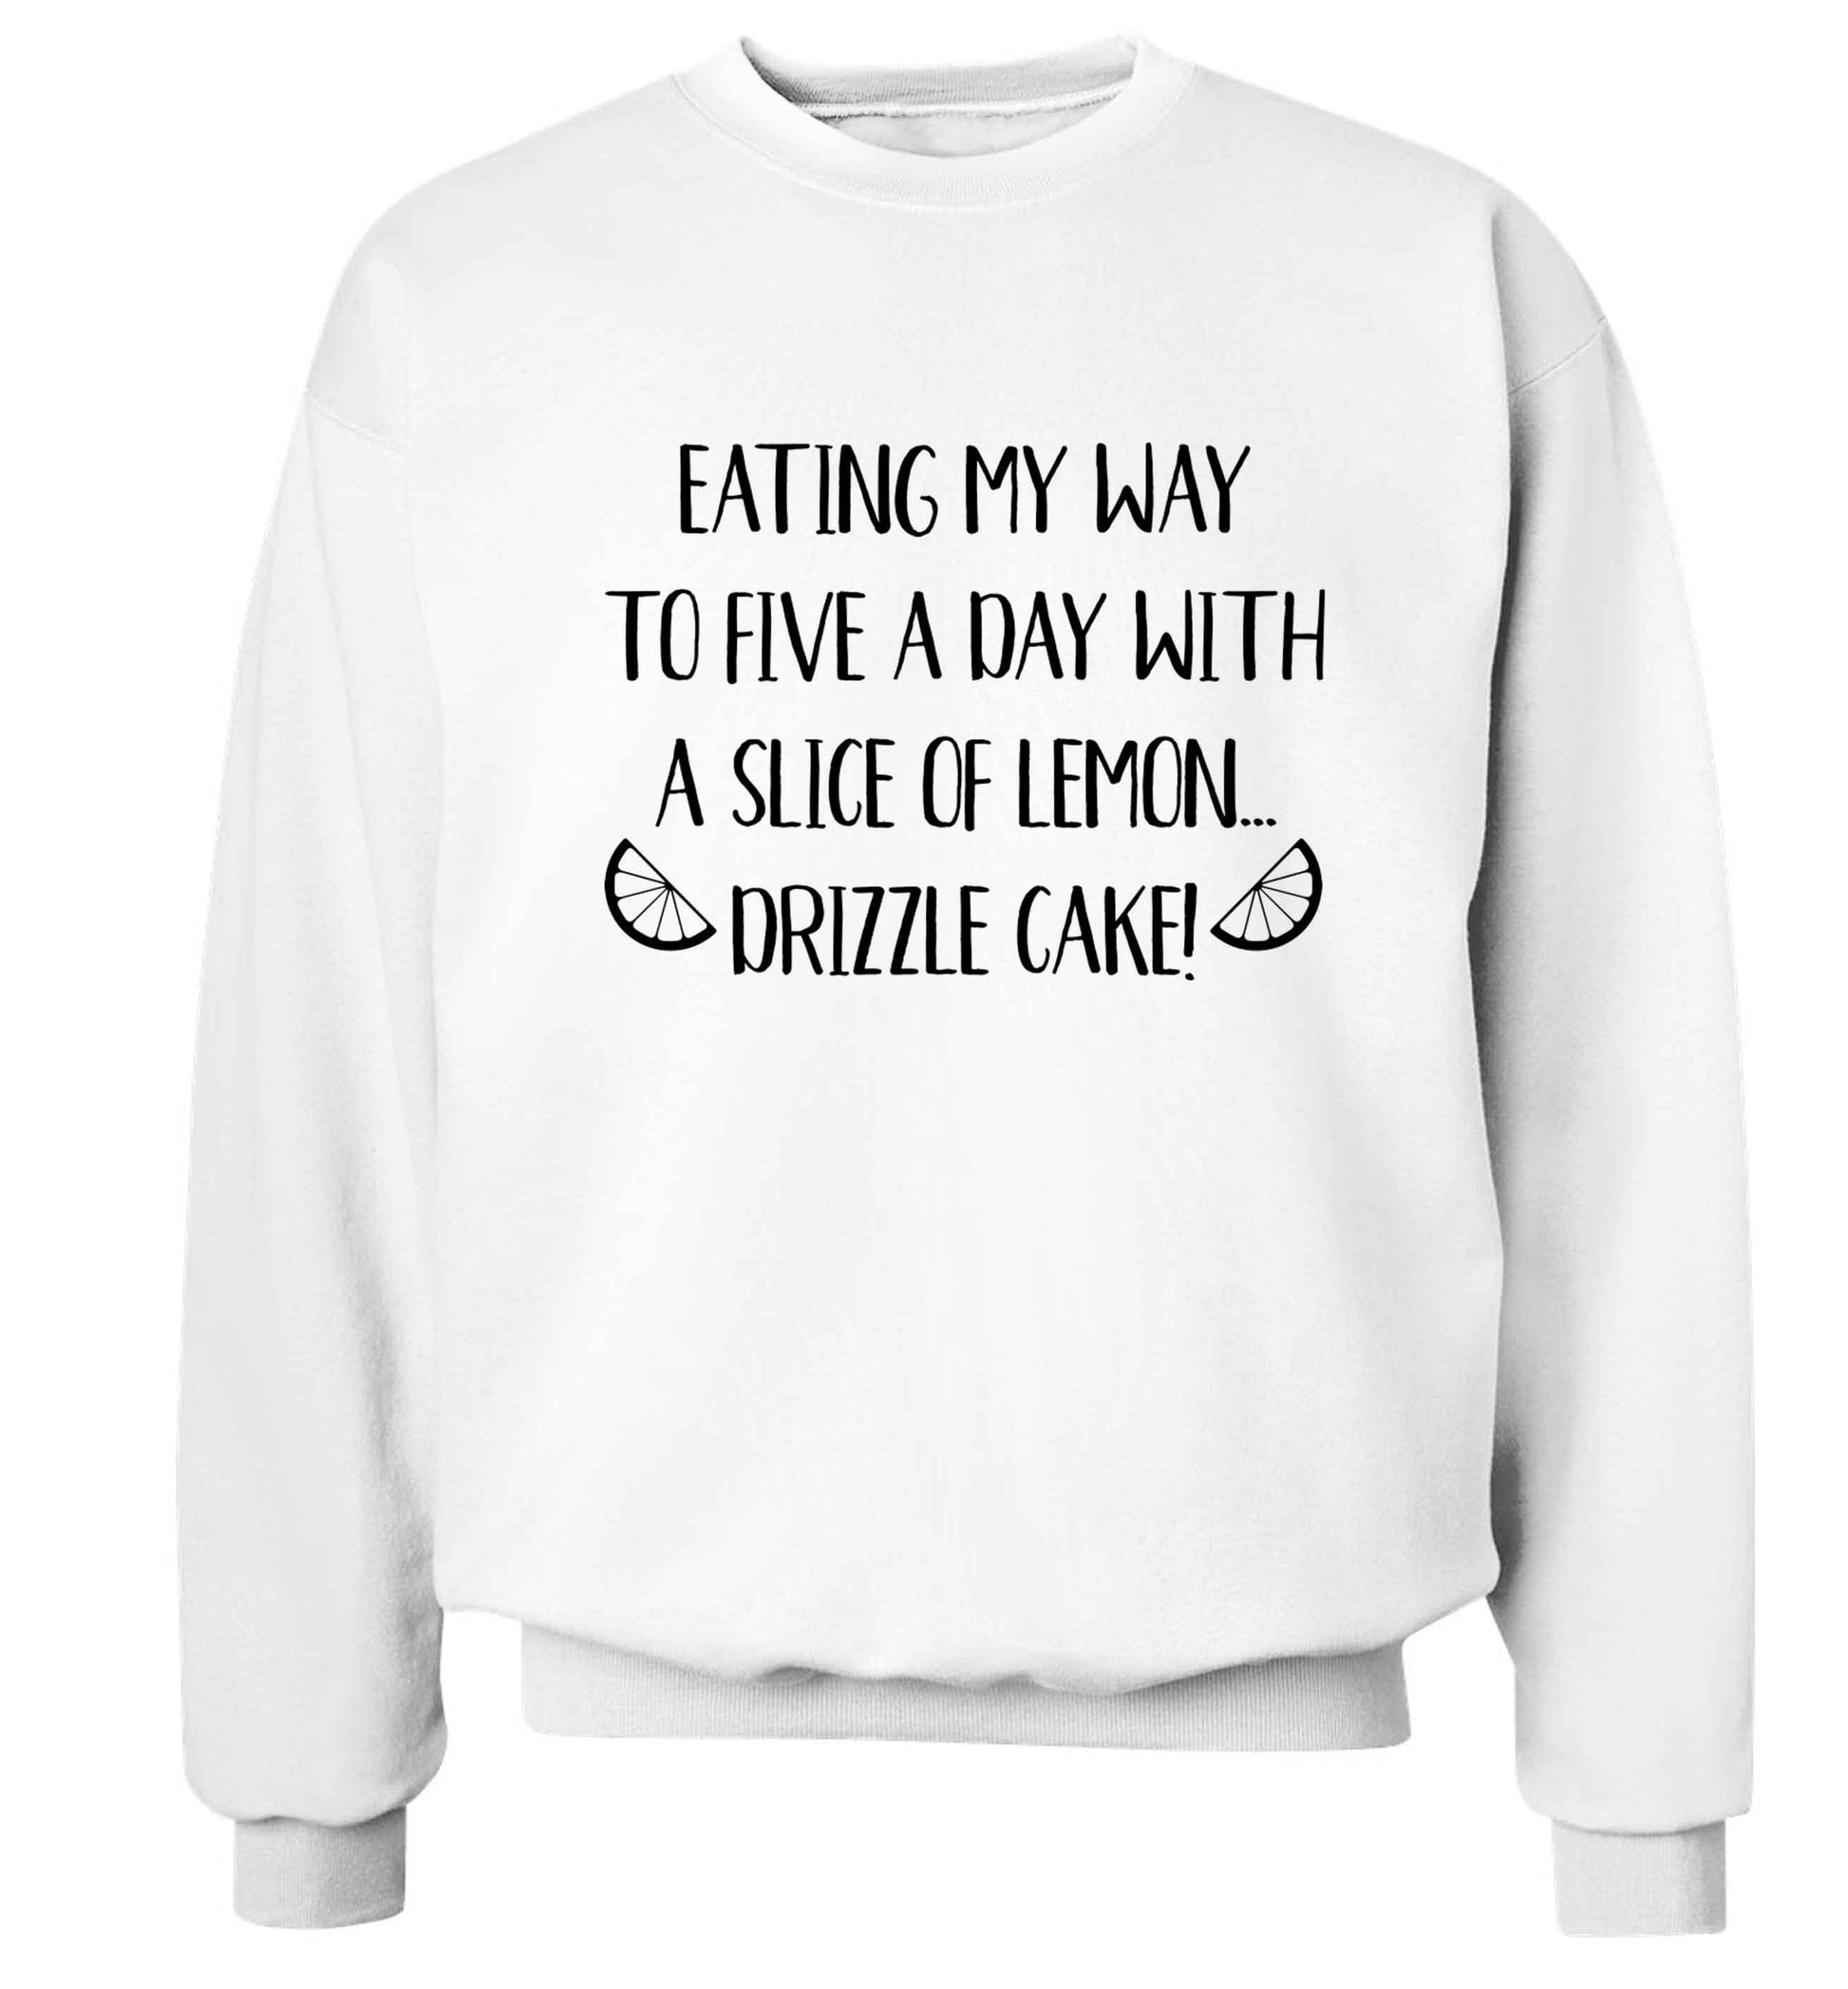 Eating my way to five a day with a slice of lemon drizzle cake day Adult's unisex white Sweater 2XL